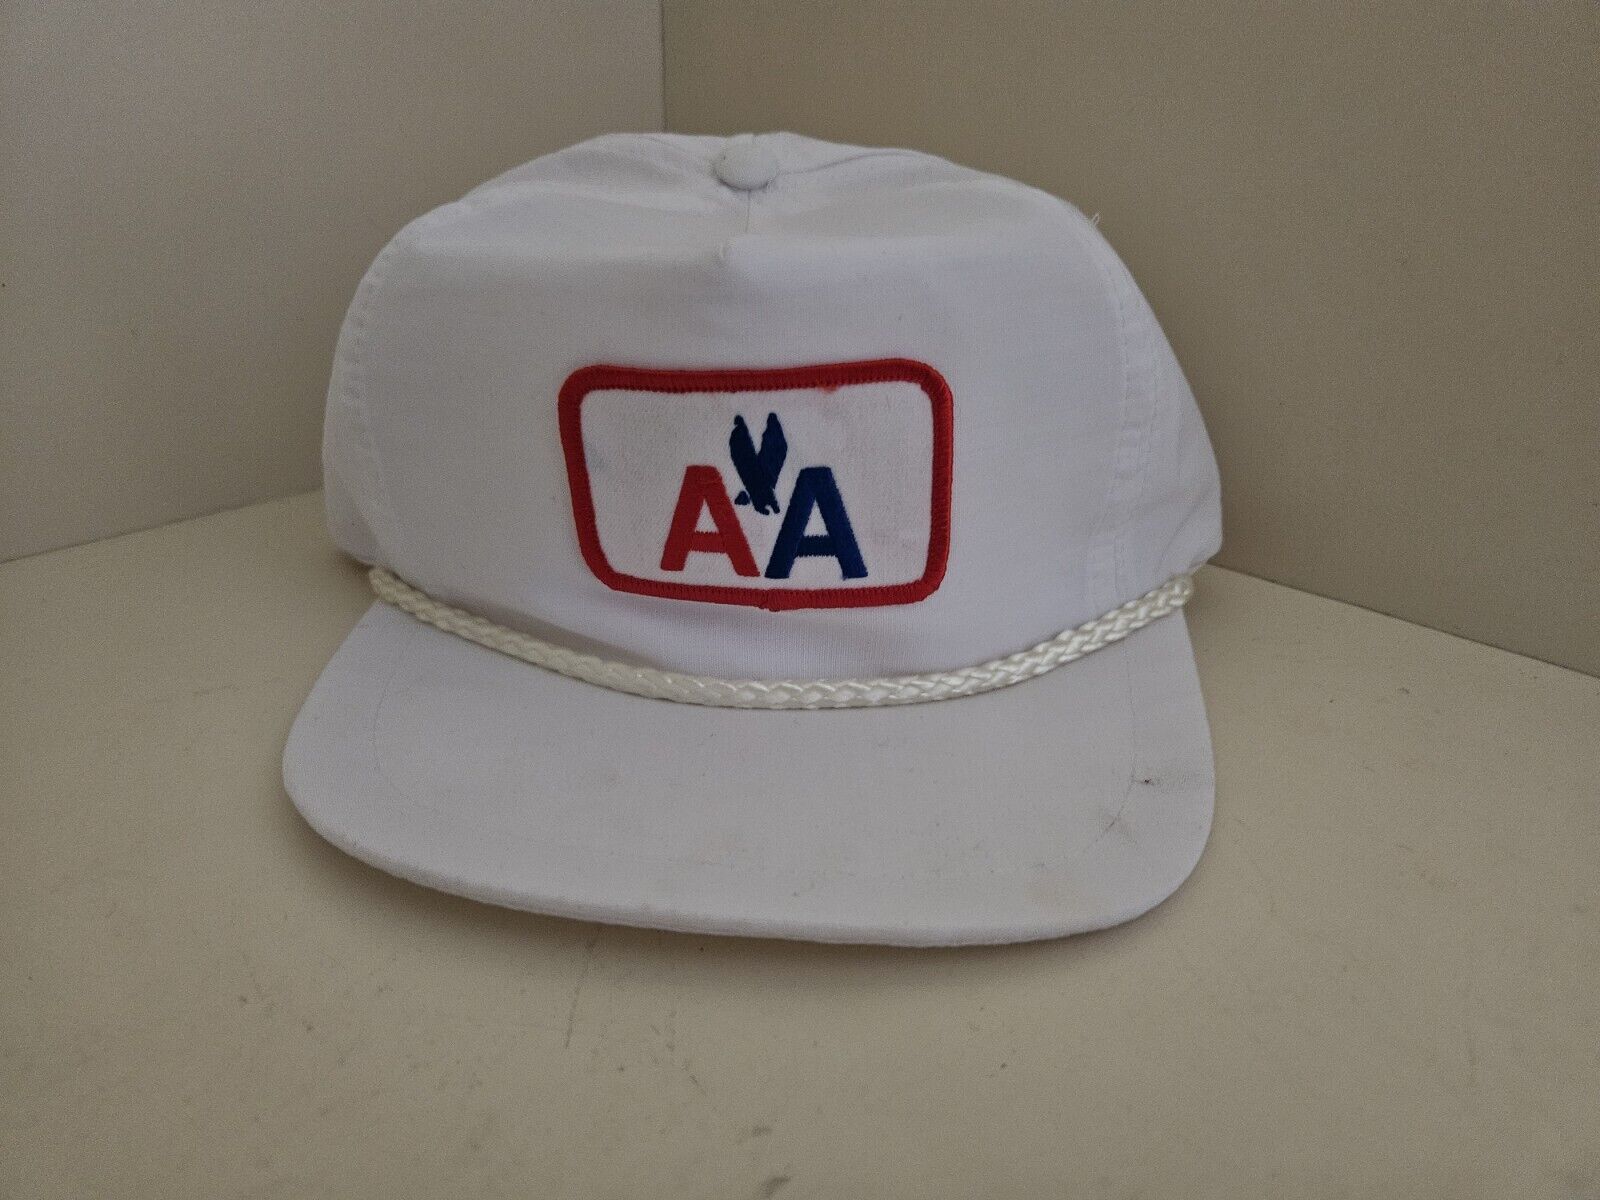 Vintage 80s American Airlines AA Blue Trucker Mesh Snapback Hat Roped Blue White